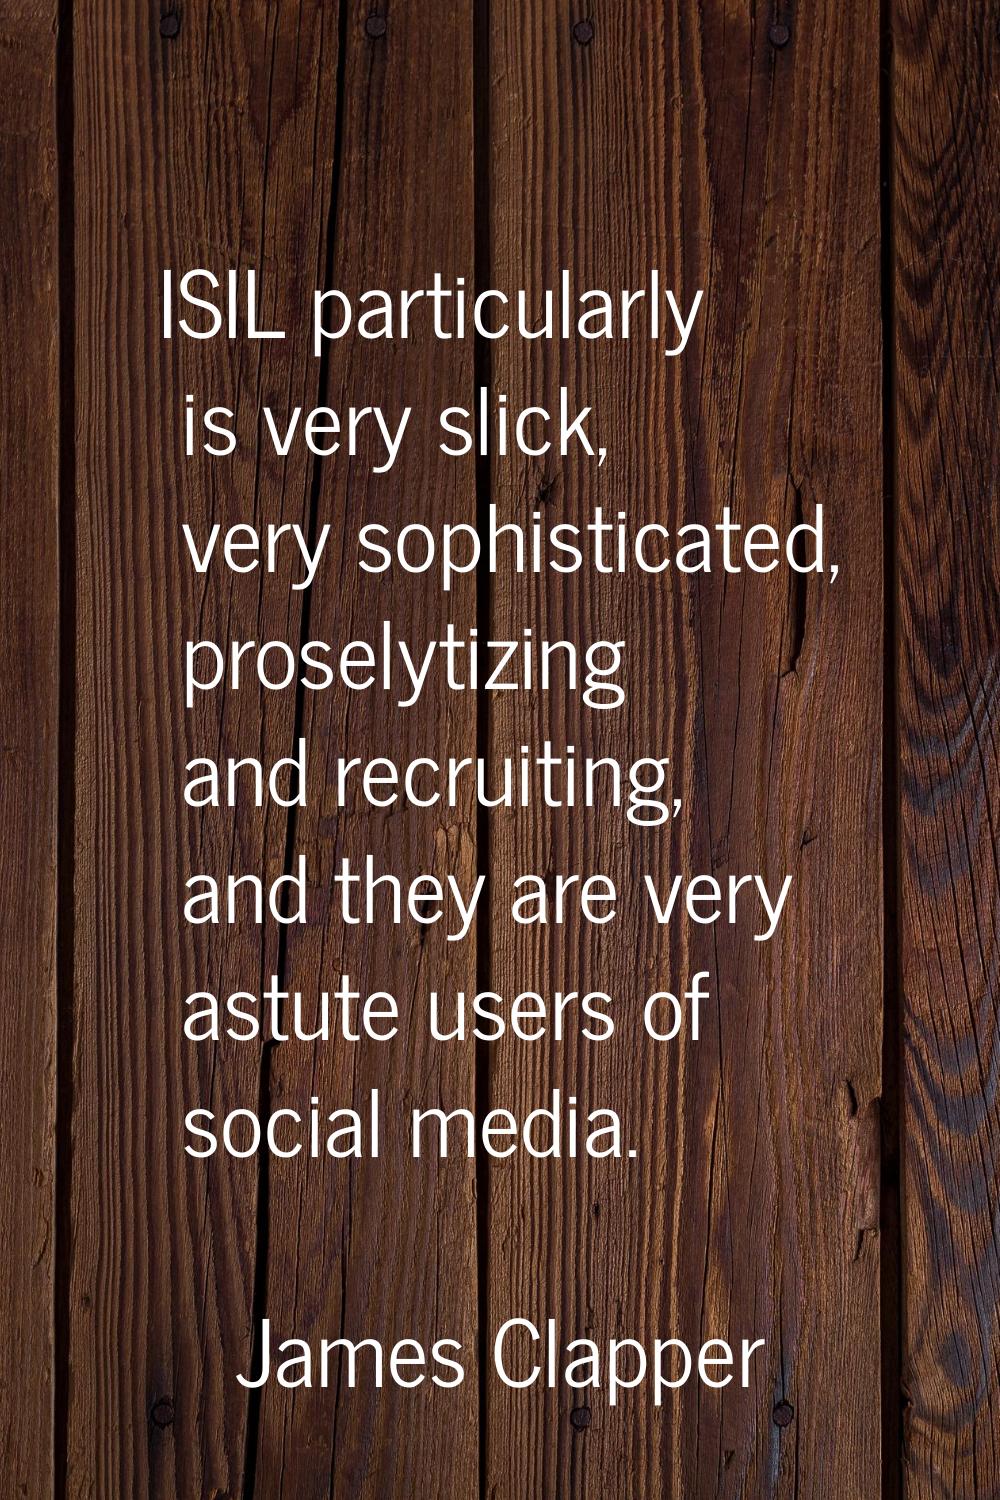 ISIL particularly is very slick, very sophisticated, proselytizing and recruiting, and they are ver